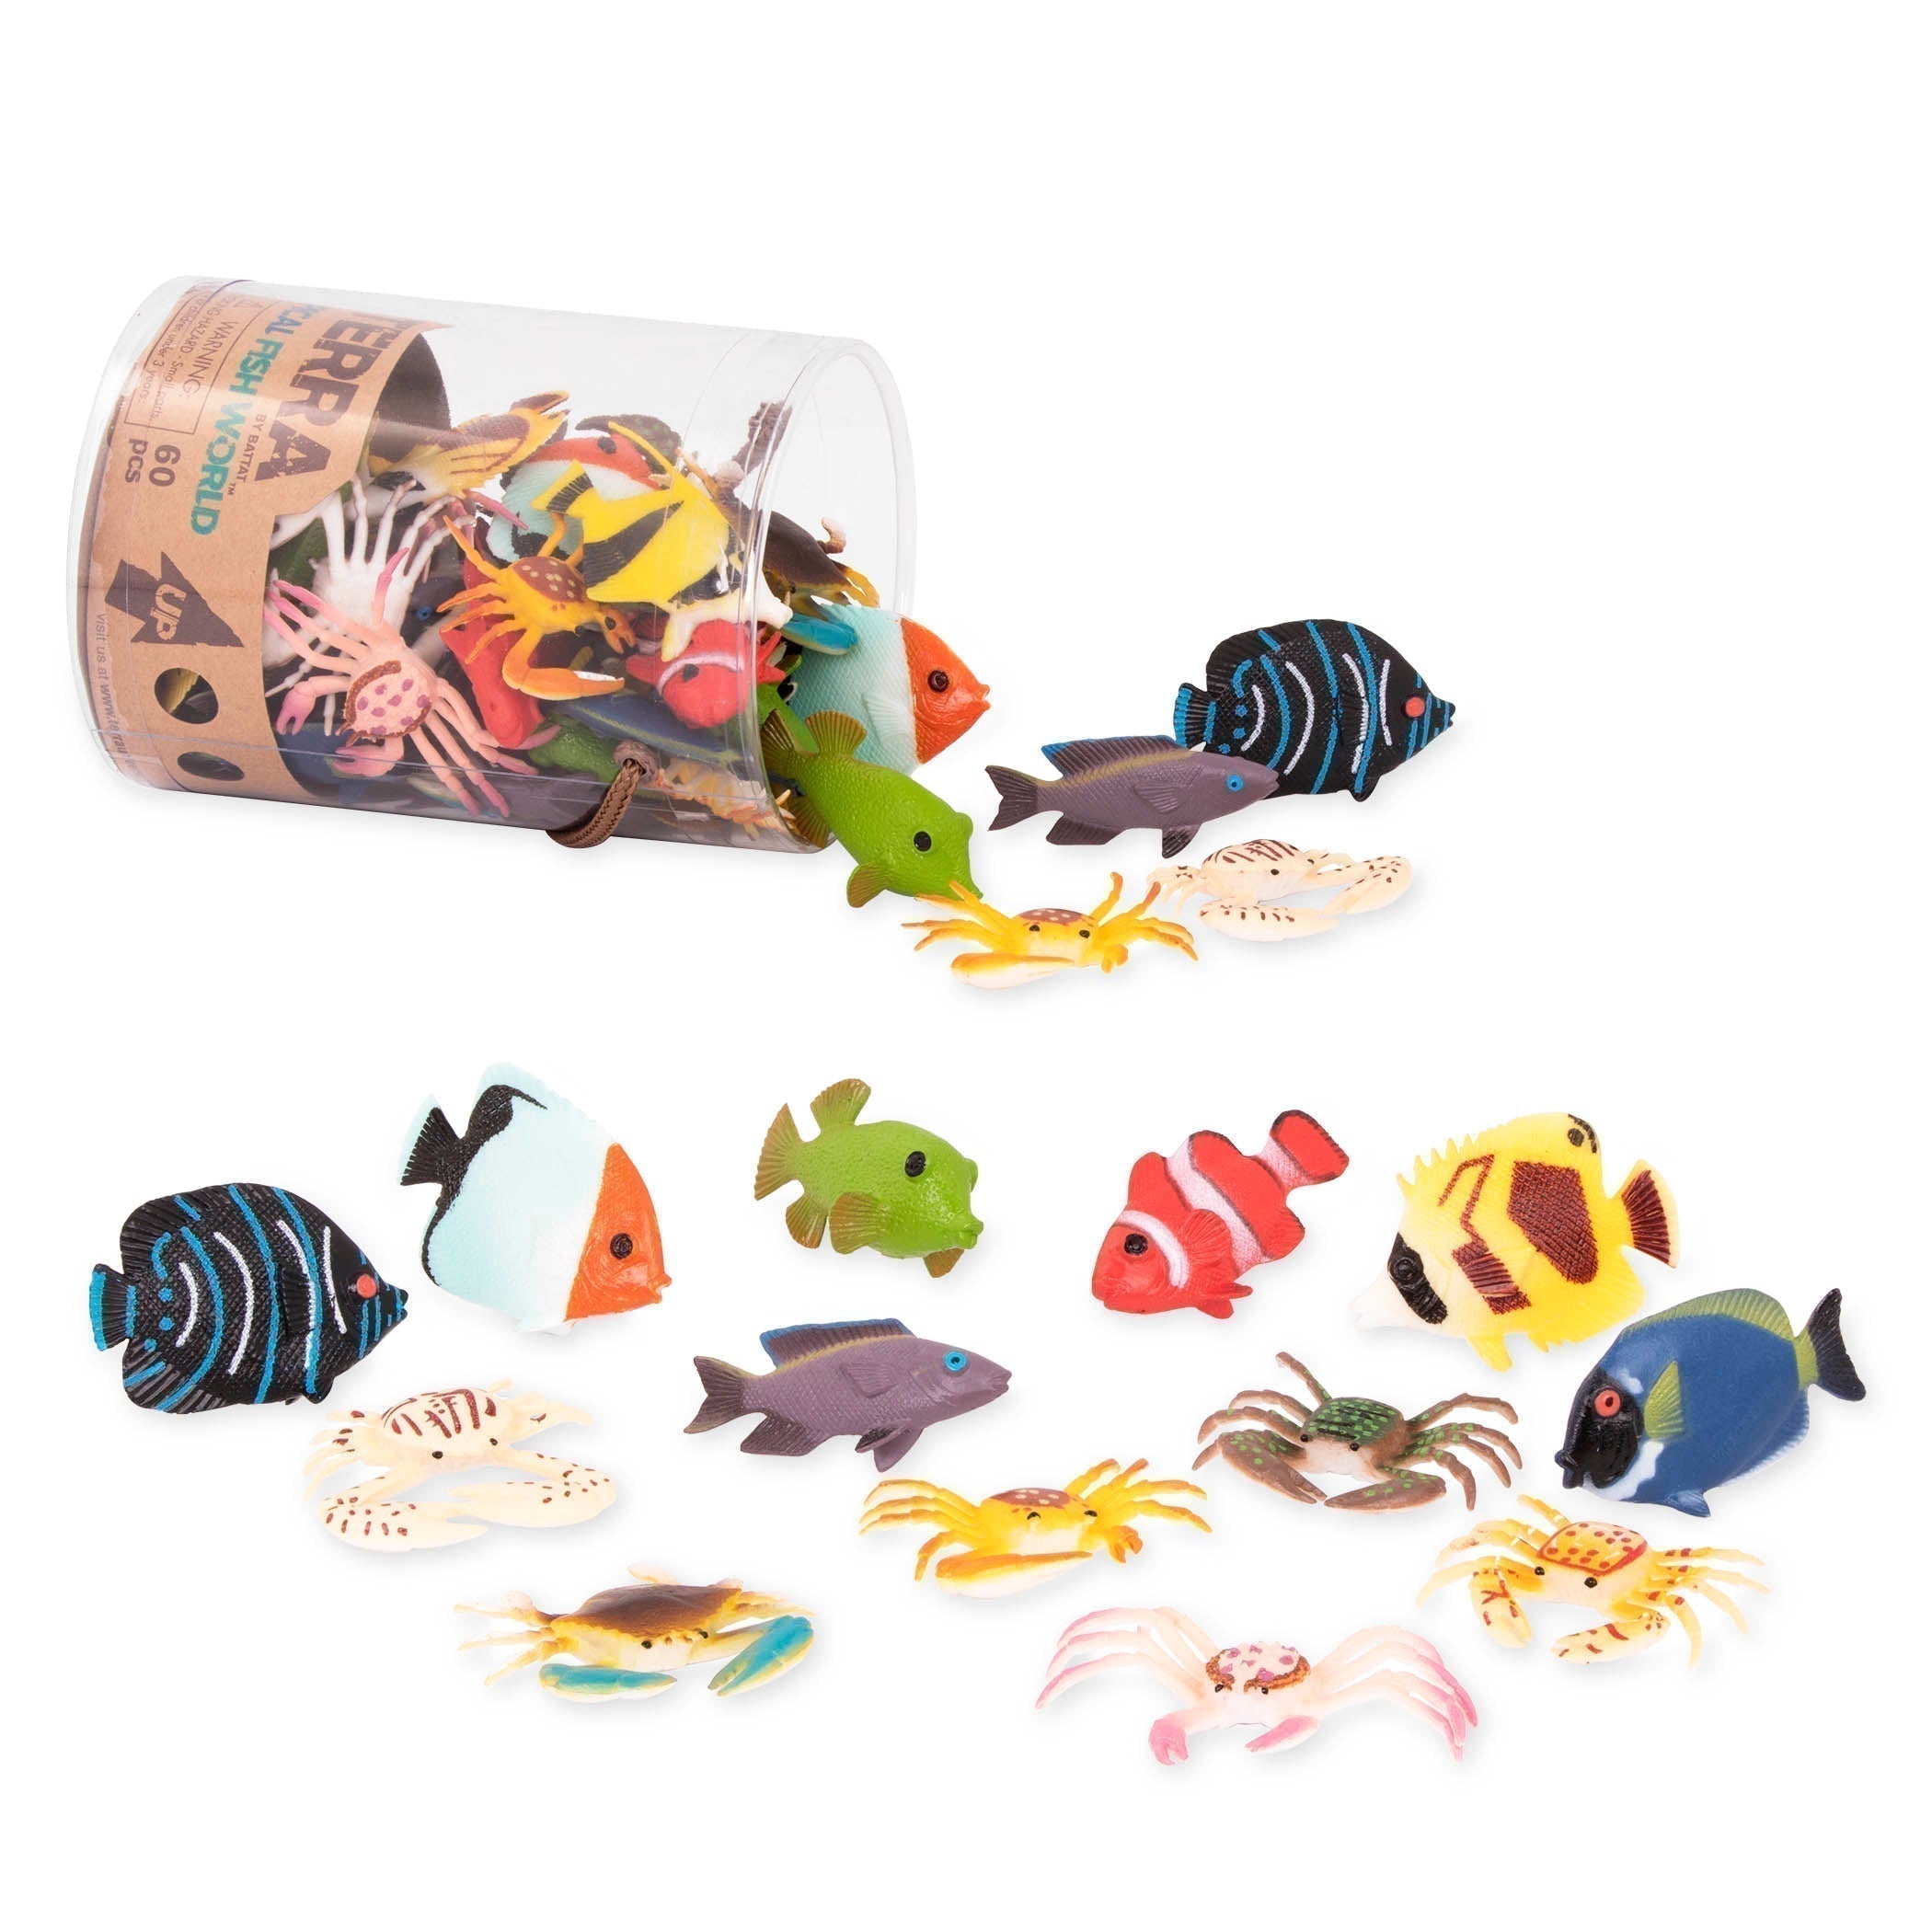 Terra Tropical Fish Tube, From the ocean depths and coral reefs of the world to your playroom it’s Terra’s Tropical Fish World in a tube! This amazing collection includes 12 different fish toys, and 60 tropical fish in total. The small ocean fish toys and sea creatures have incredibly lifelike details and realistic colors. You’ll adore the vibrant red on the little clown fish and the detailed spots on the toy crab. And, each plastic fish measures approximately 2 inches so they are perfect goodie bag stuffer